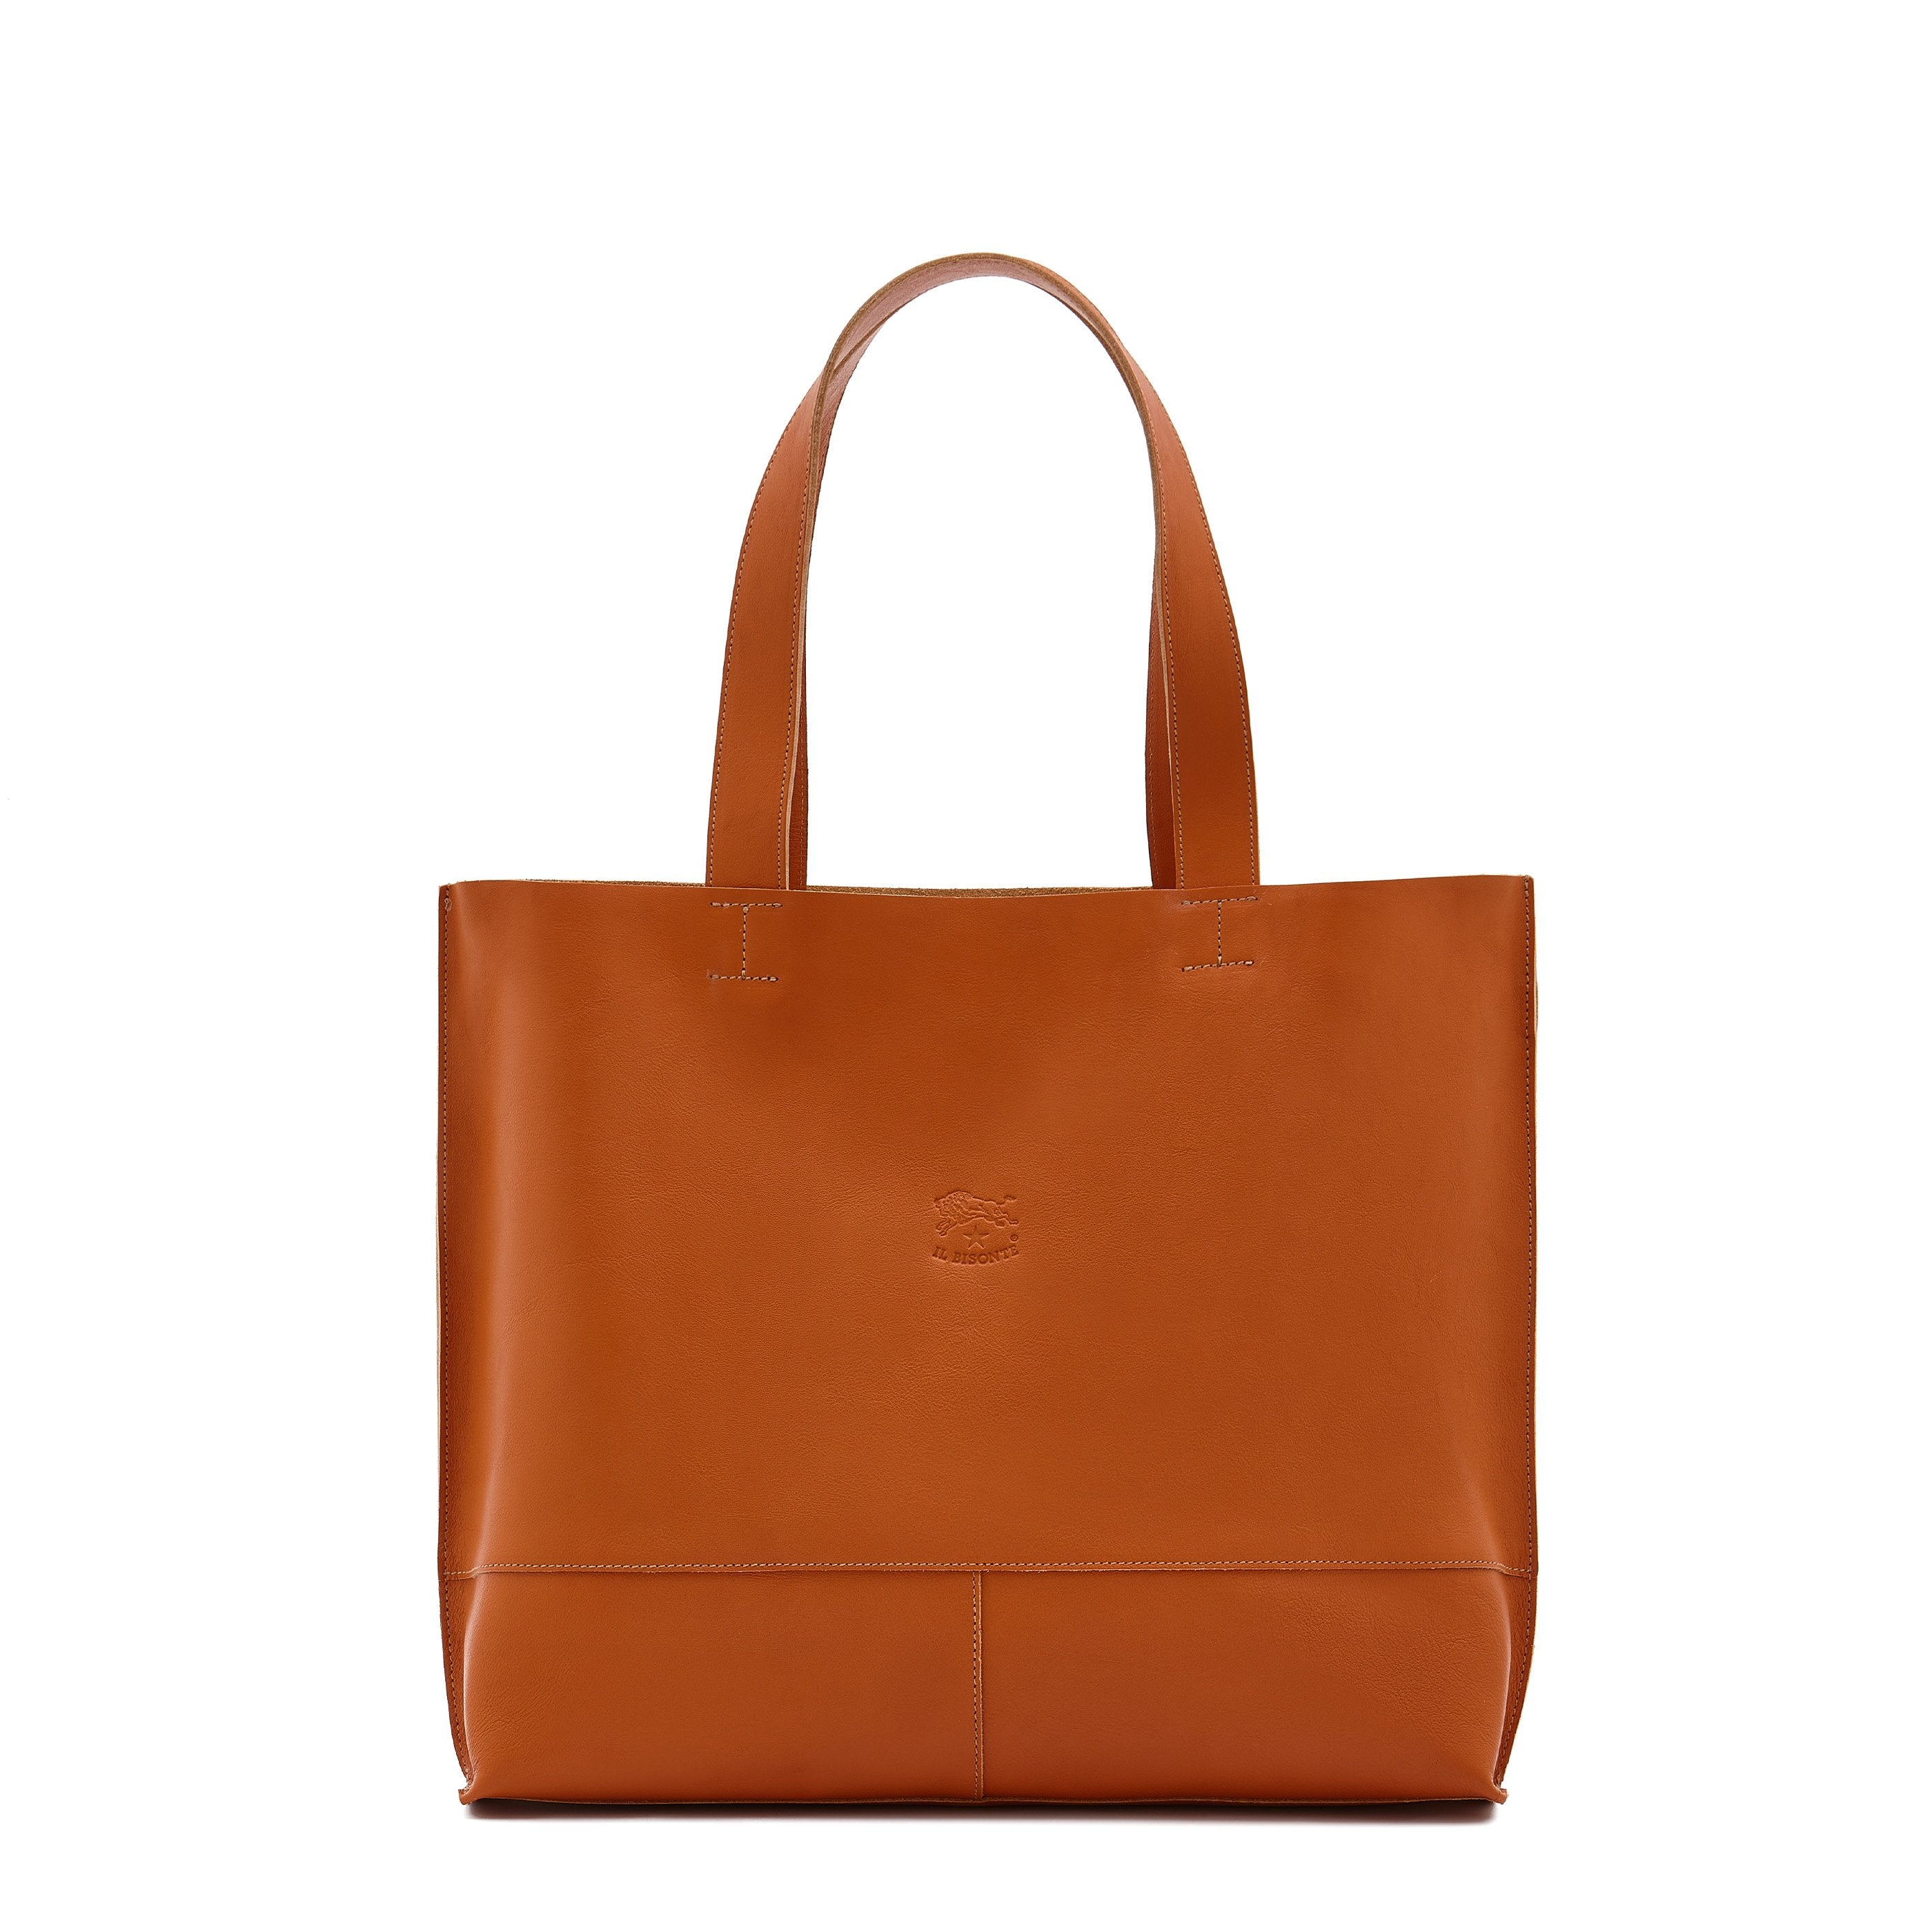 Talamone | Women's tote bag in leather color caramel – Il Bisonte